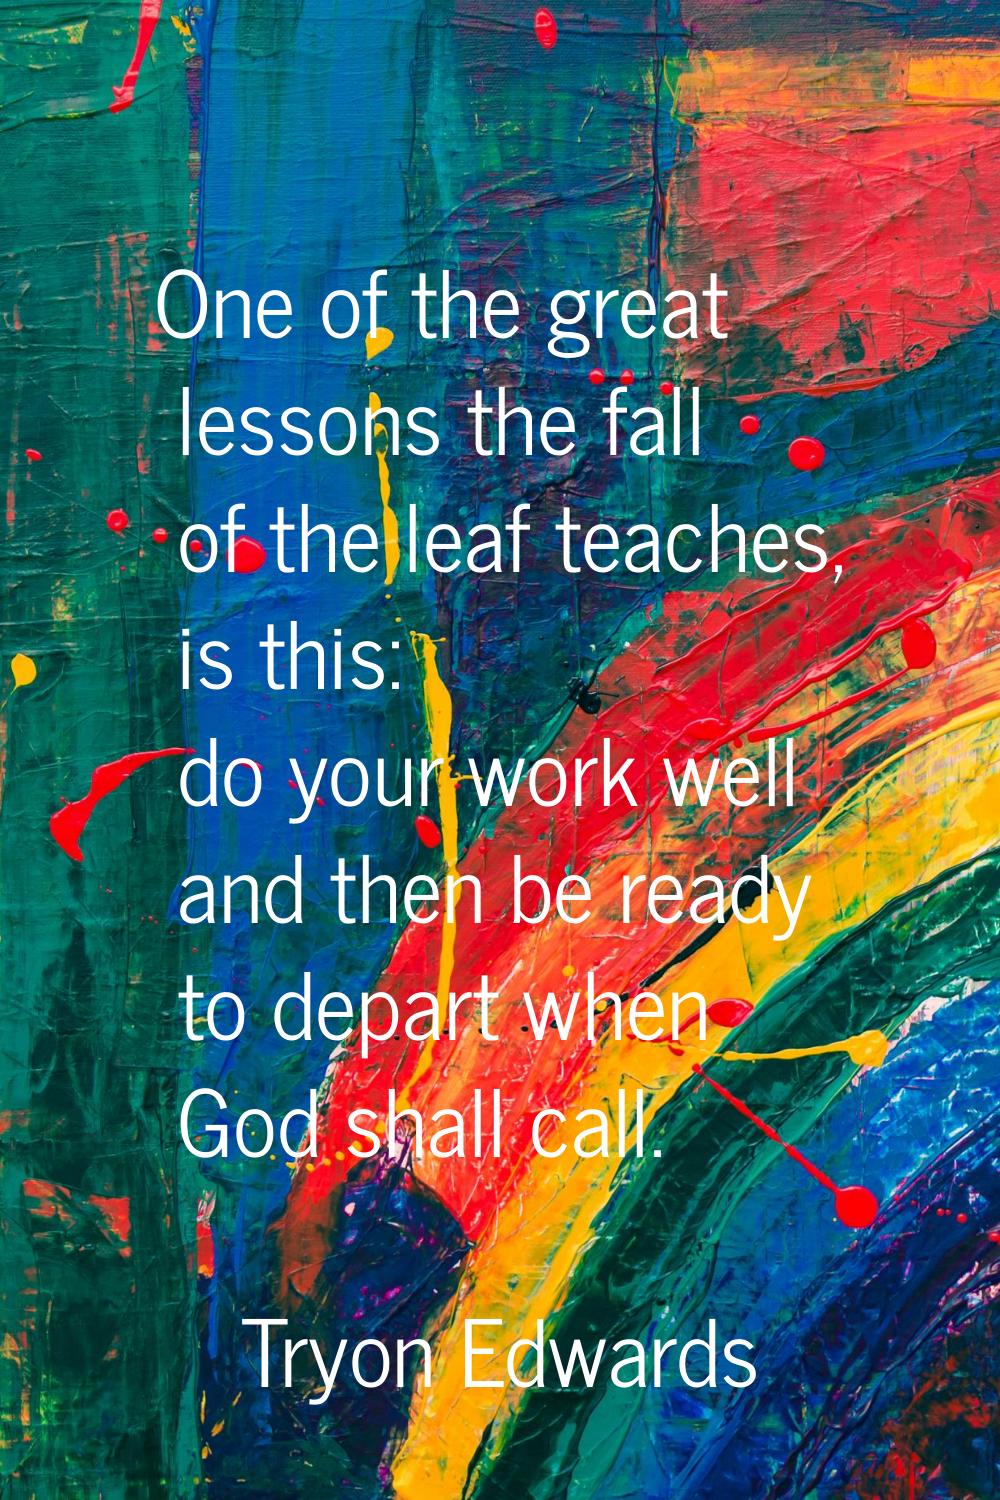 One of the great lessons the fall of the leaf teaches, is this: do your work well and then be ready